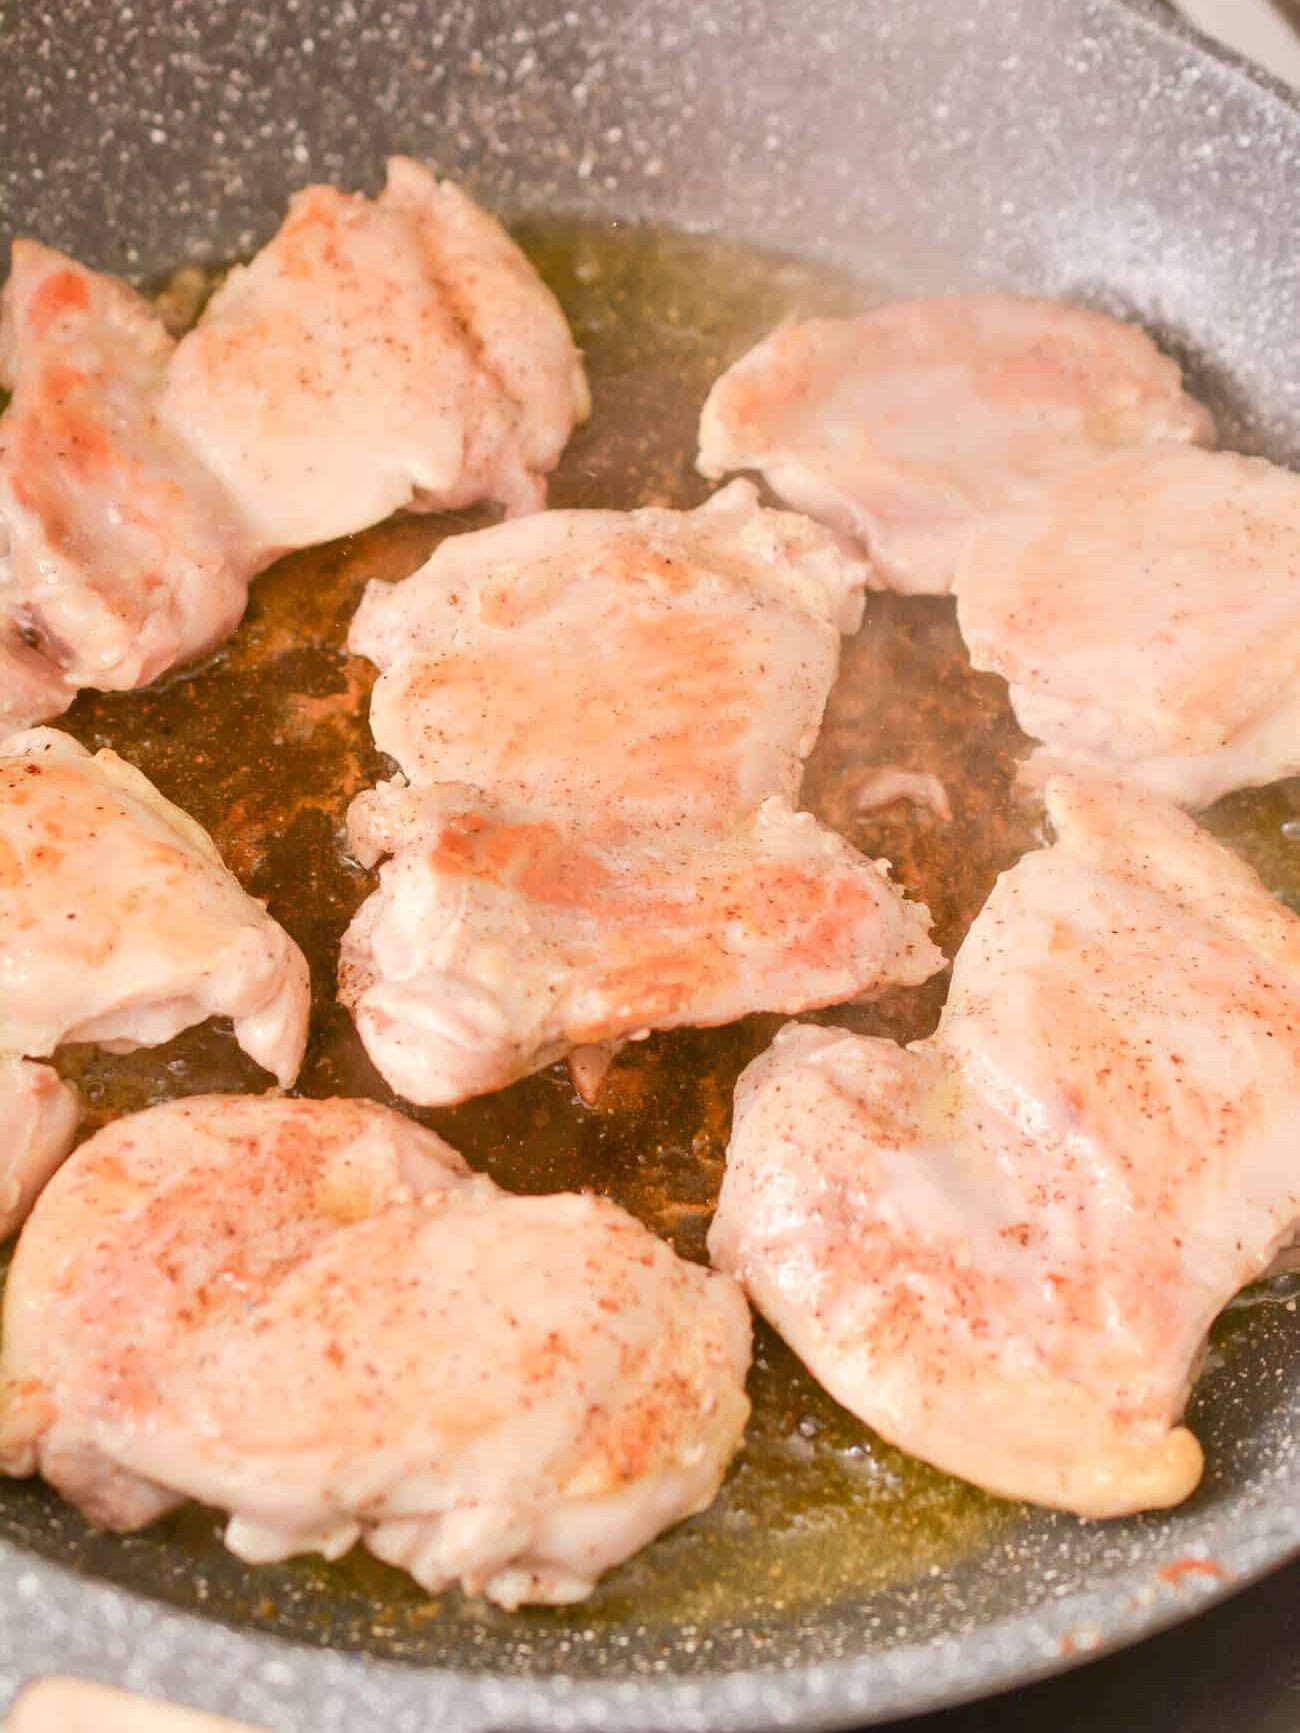 Season the chicken with salt and pepper, and sear on both sides in a skillet with olive oil.